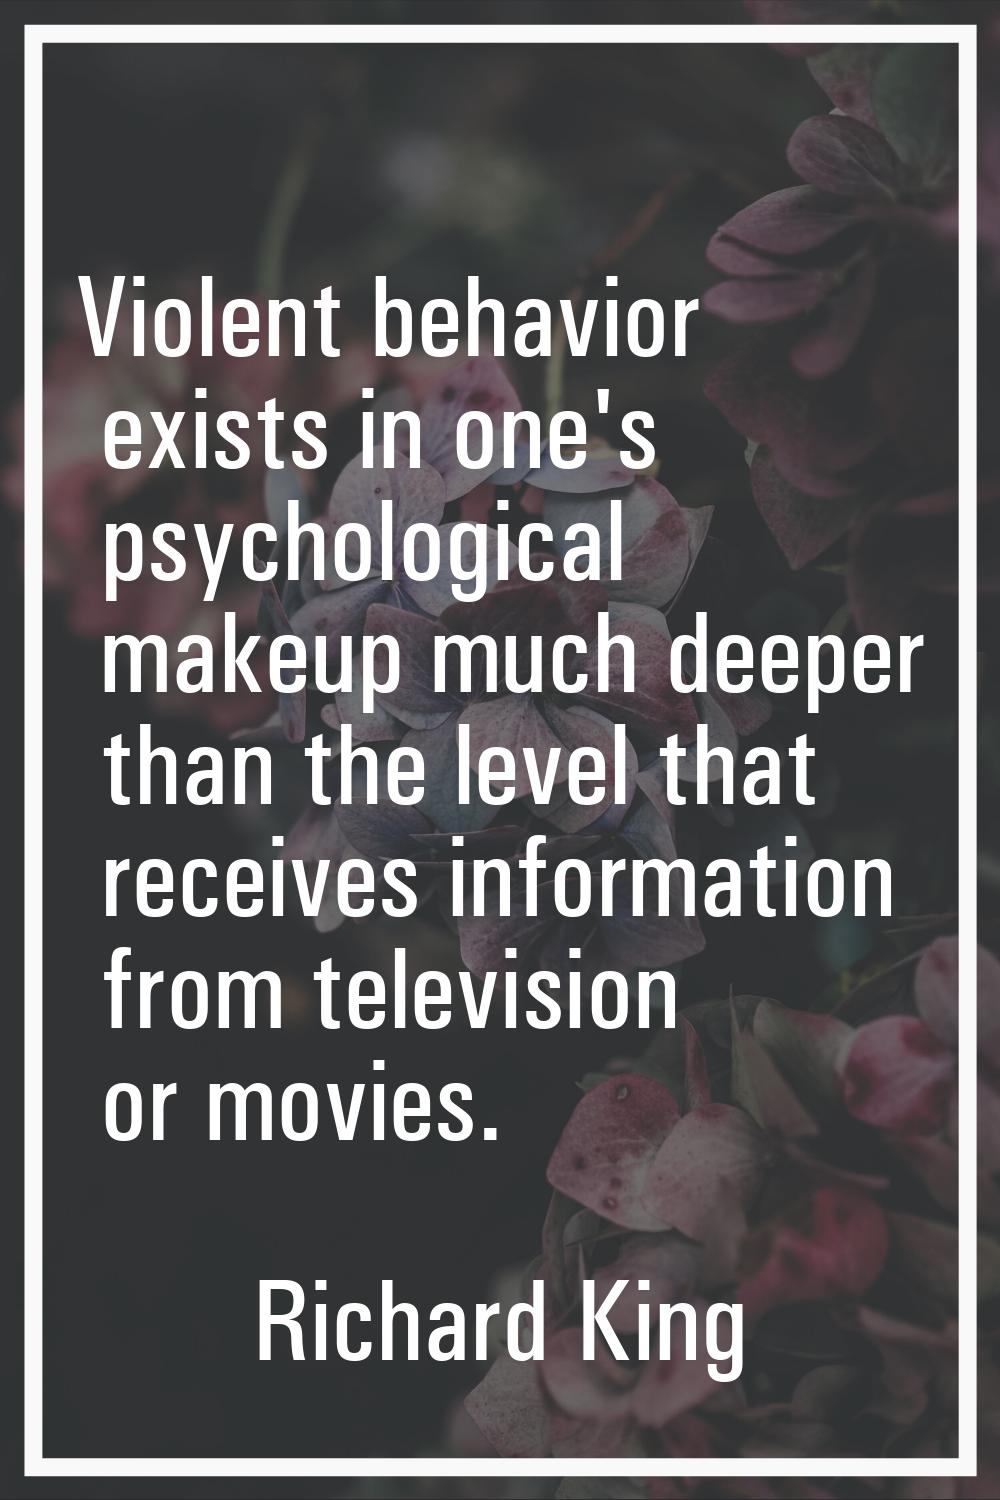 Violent behavior exists in one's psychological makeup much deeper than the level that receives info